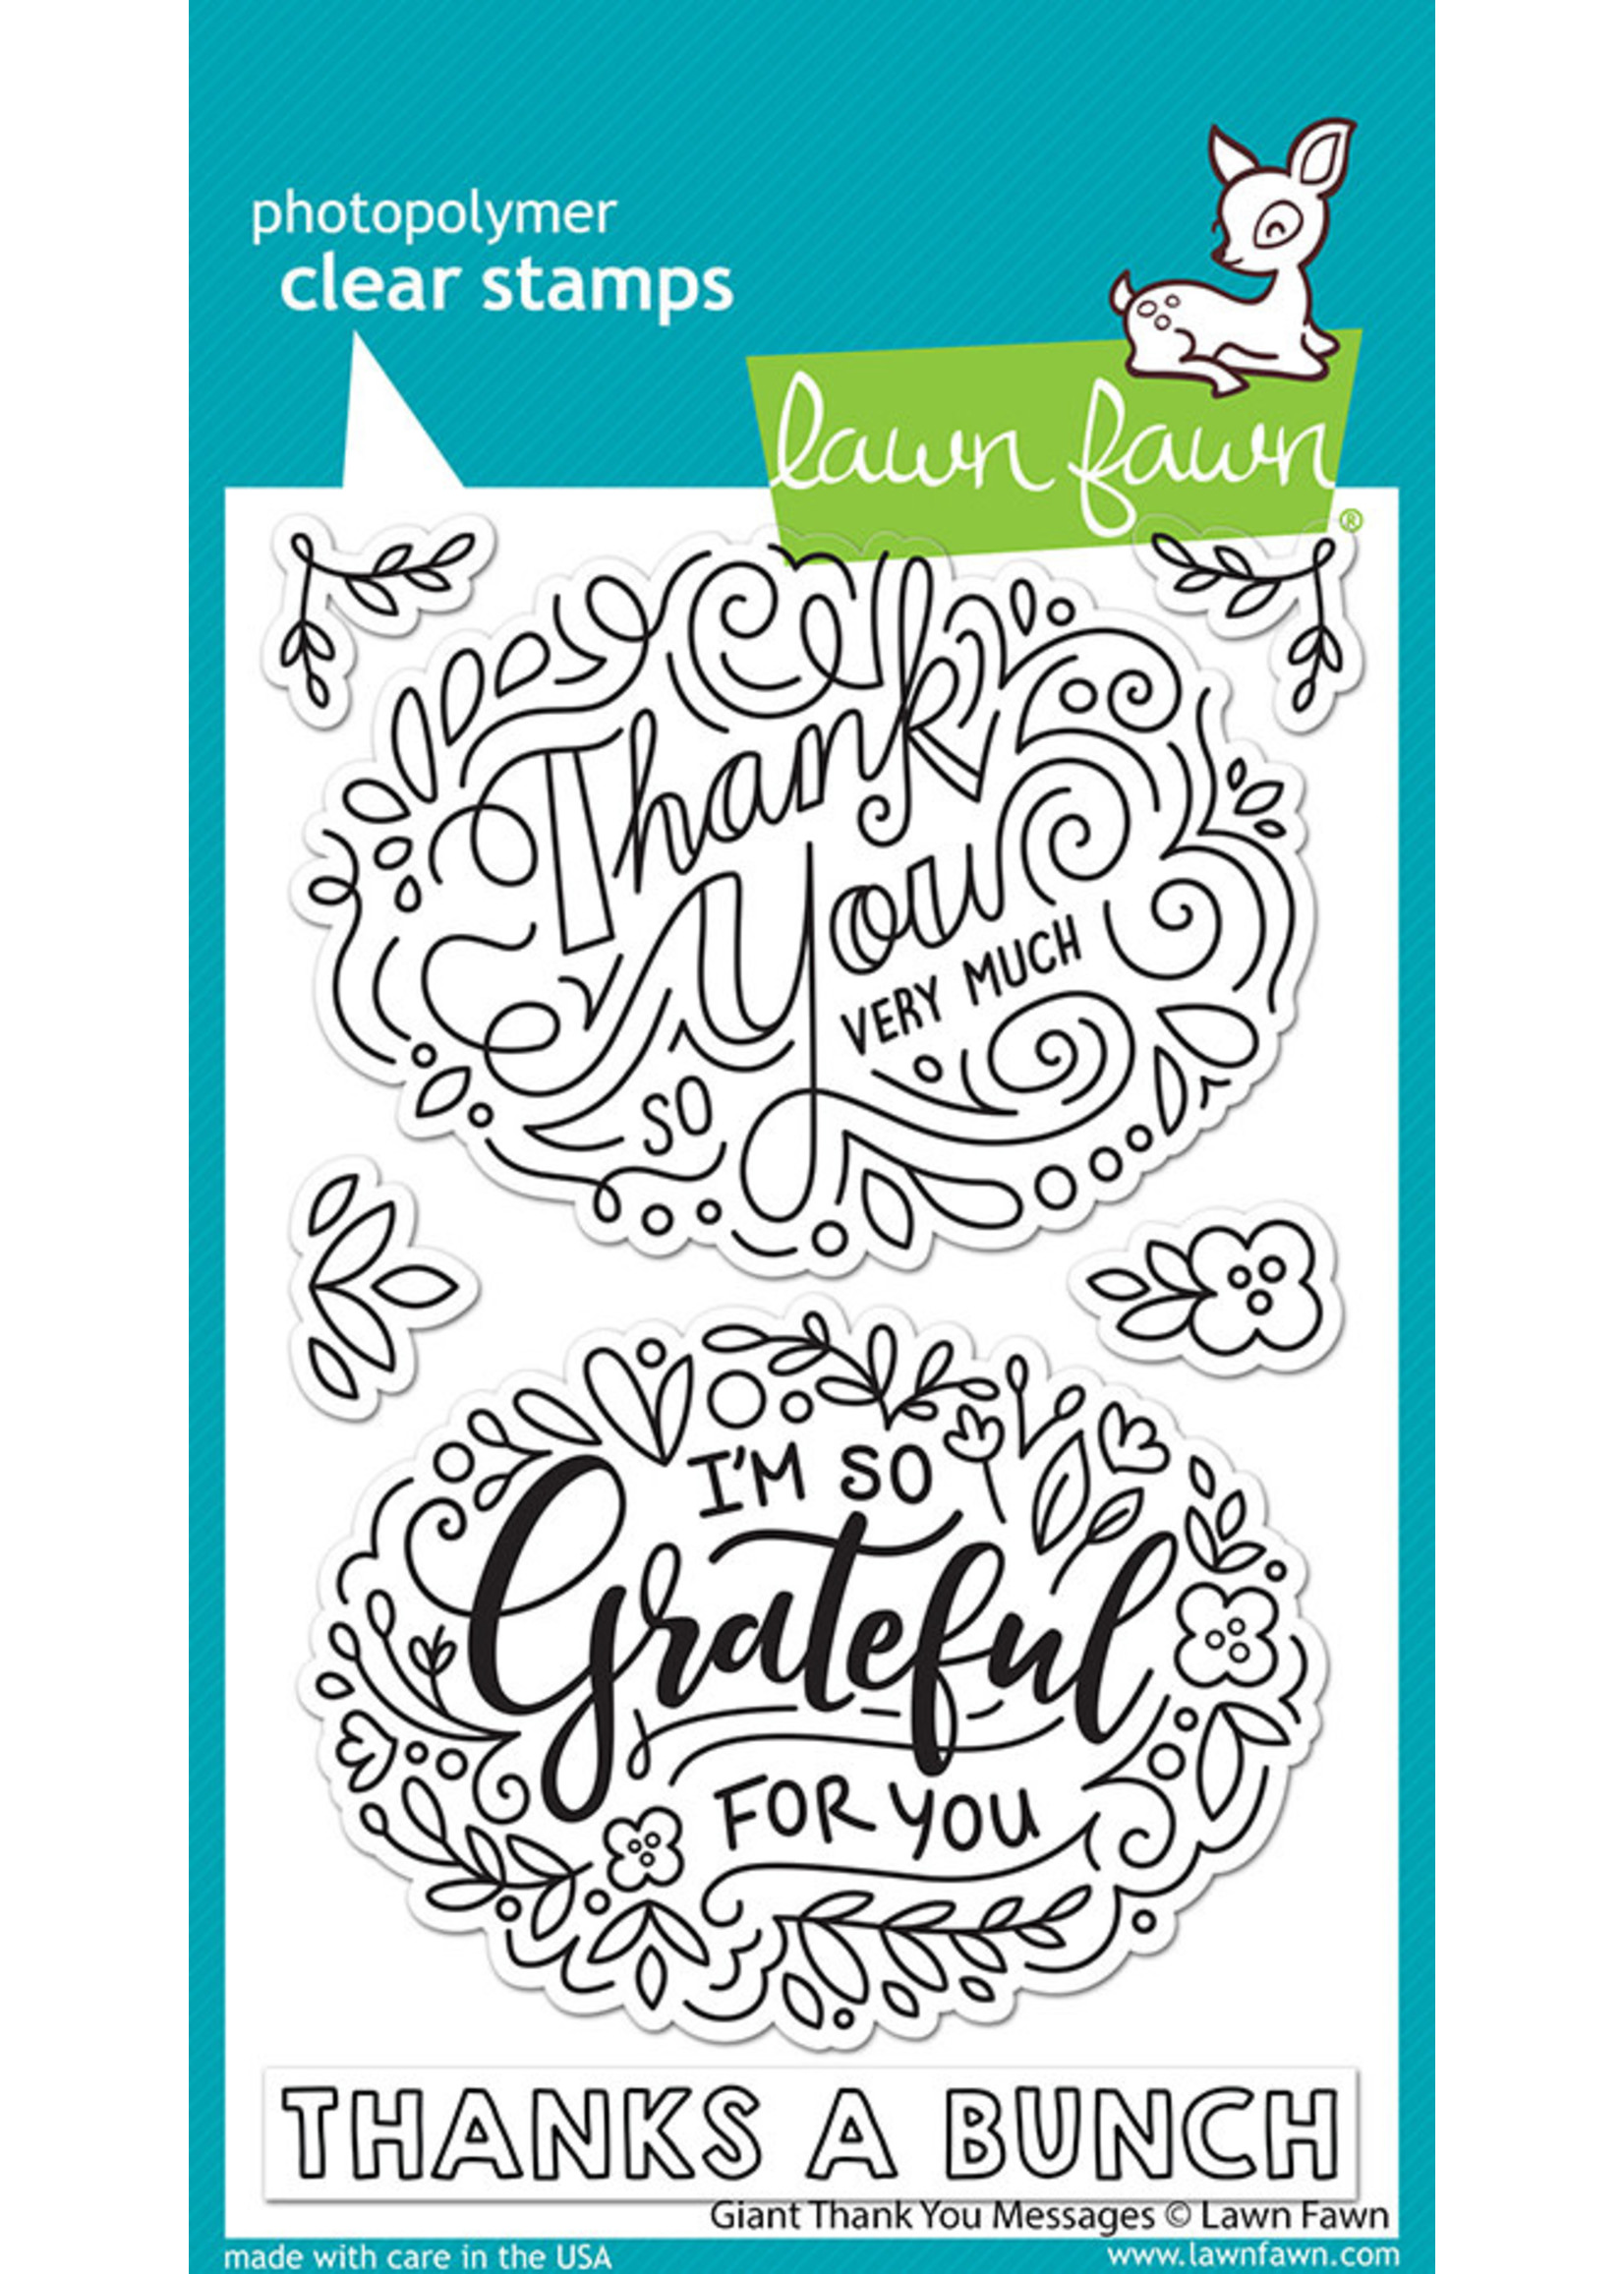 Lawn Fawn giant thank you messages stamp